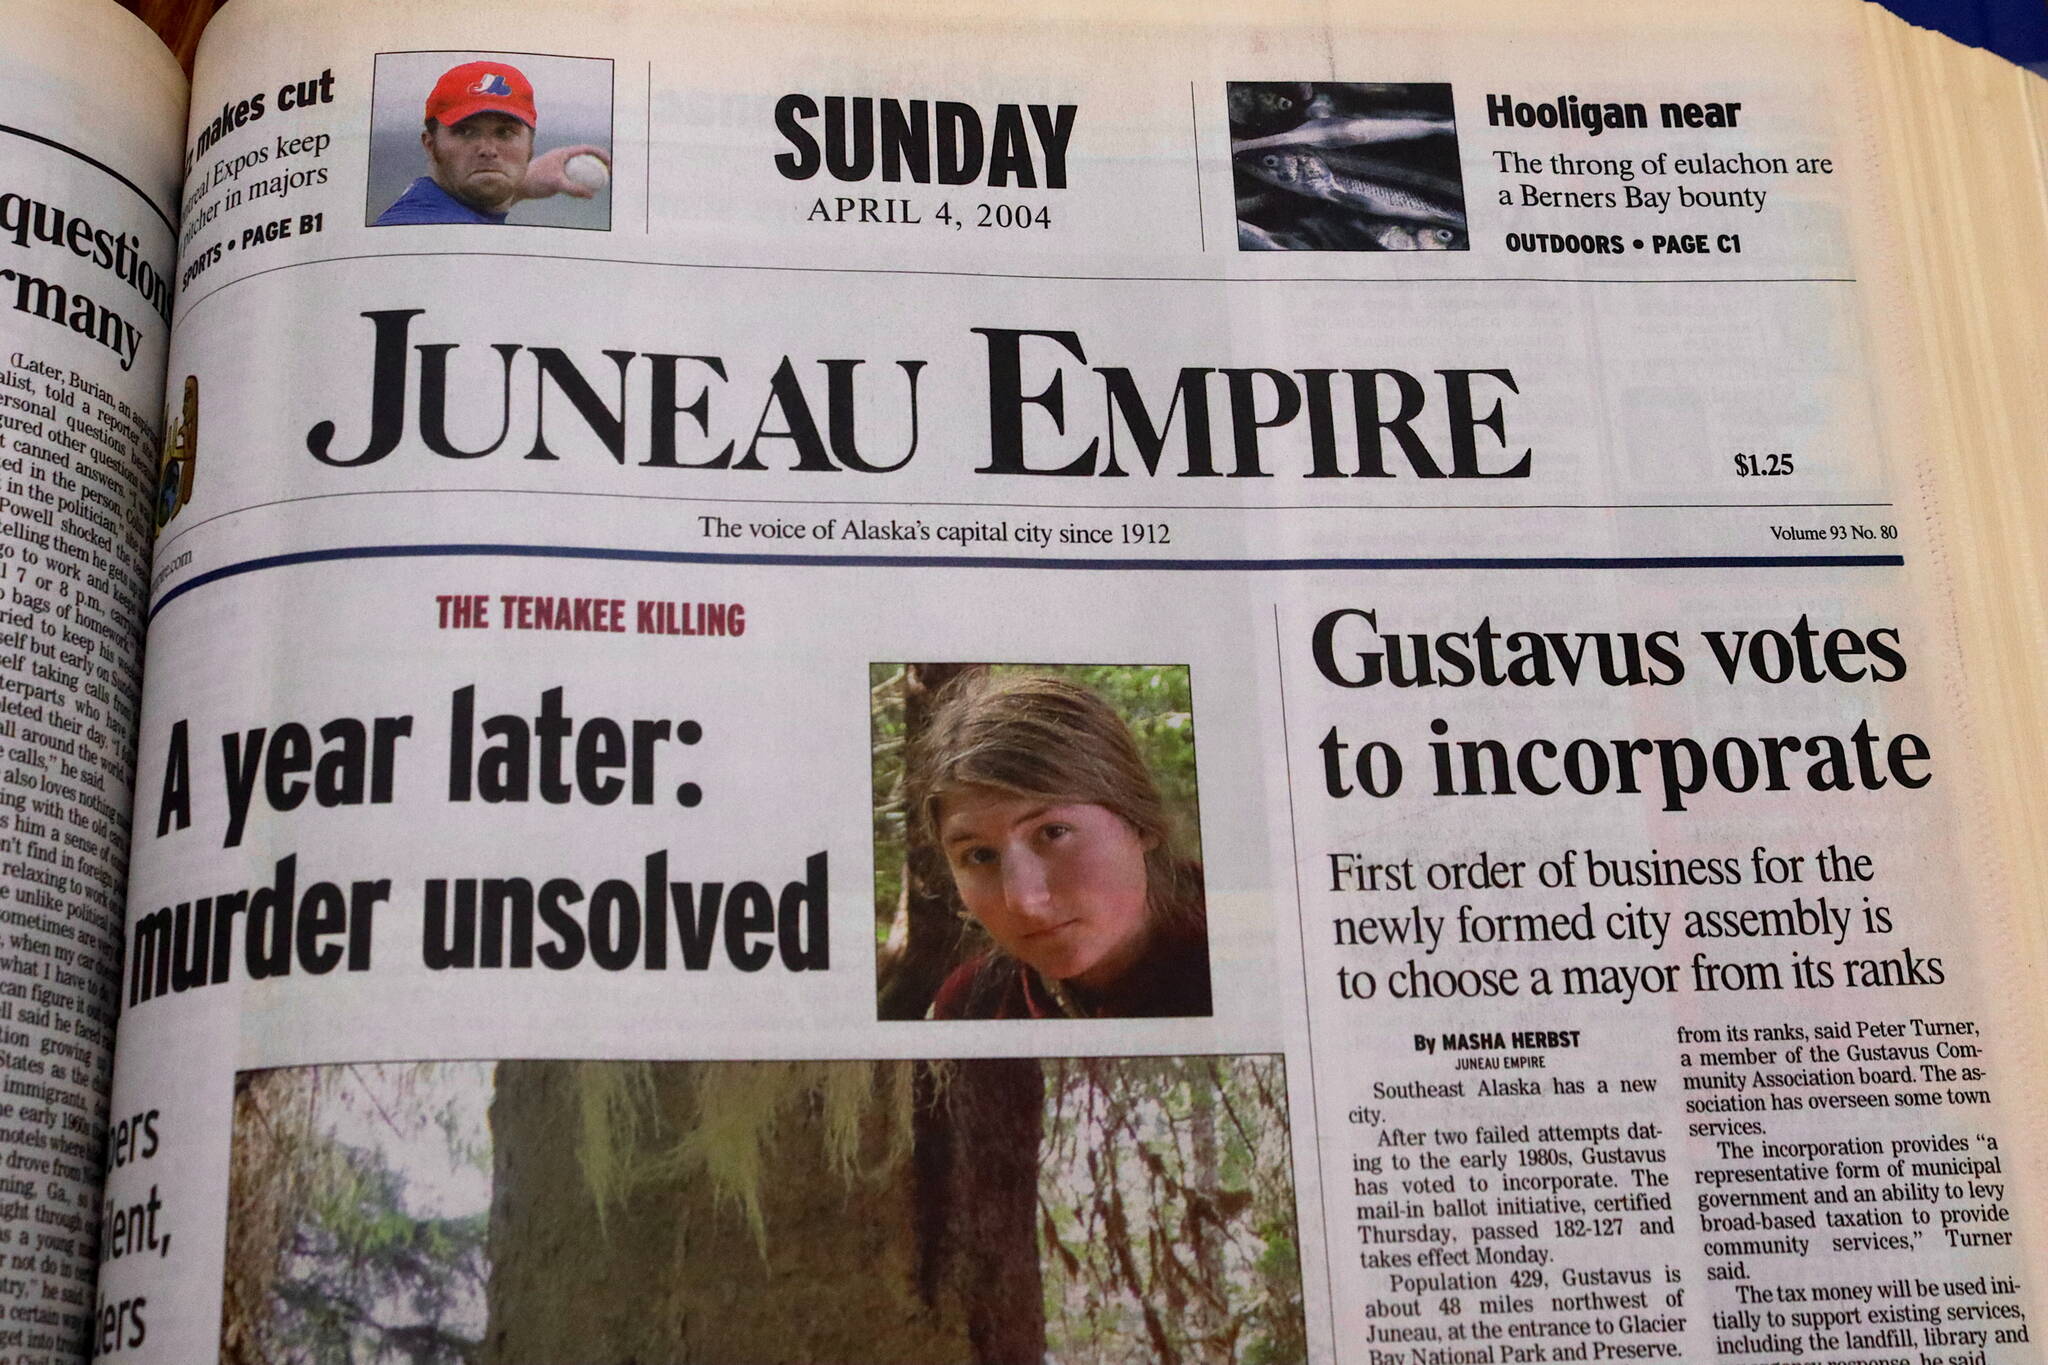 The front page of the Juneau Empire on April 4, 2004. (Mark Sabbatini/Juneau Empire)